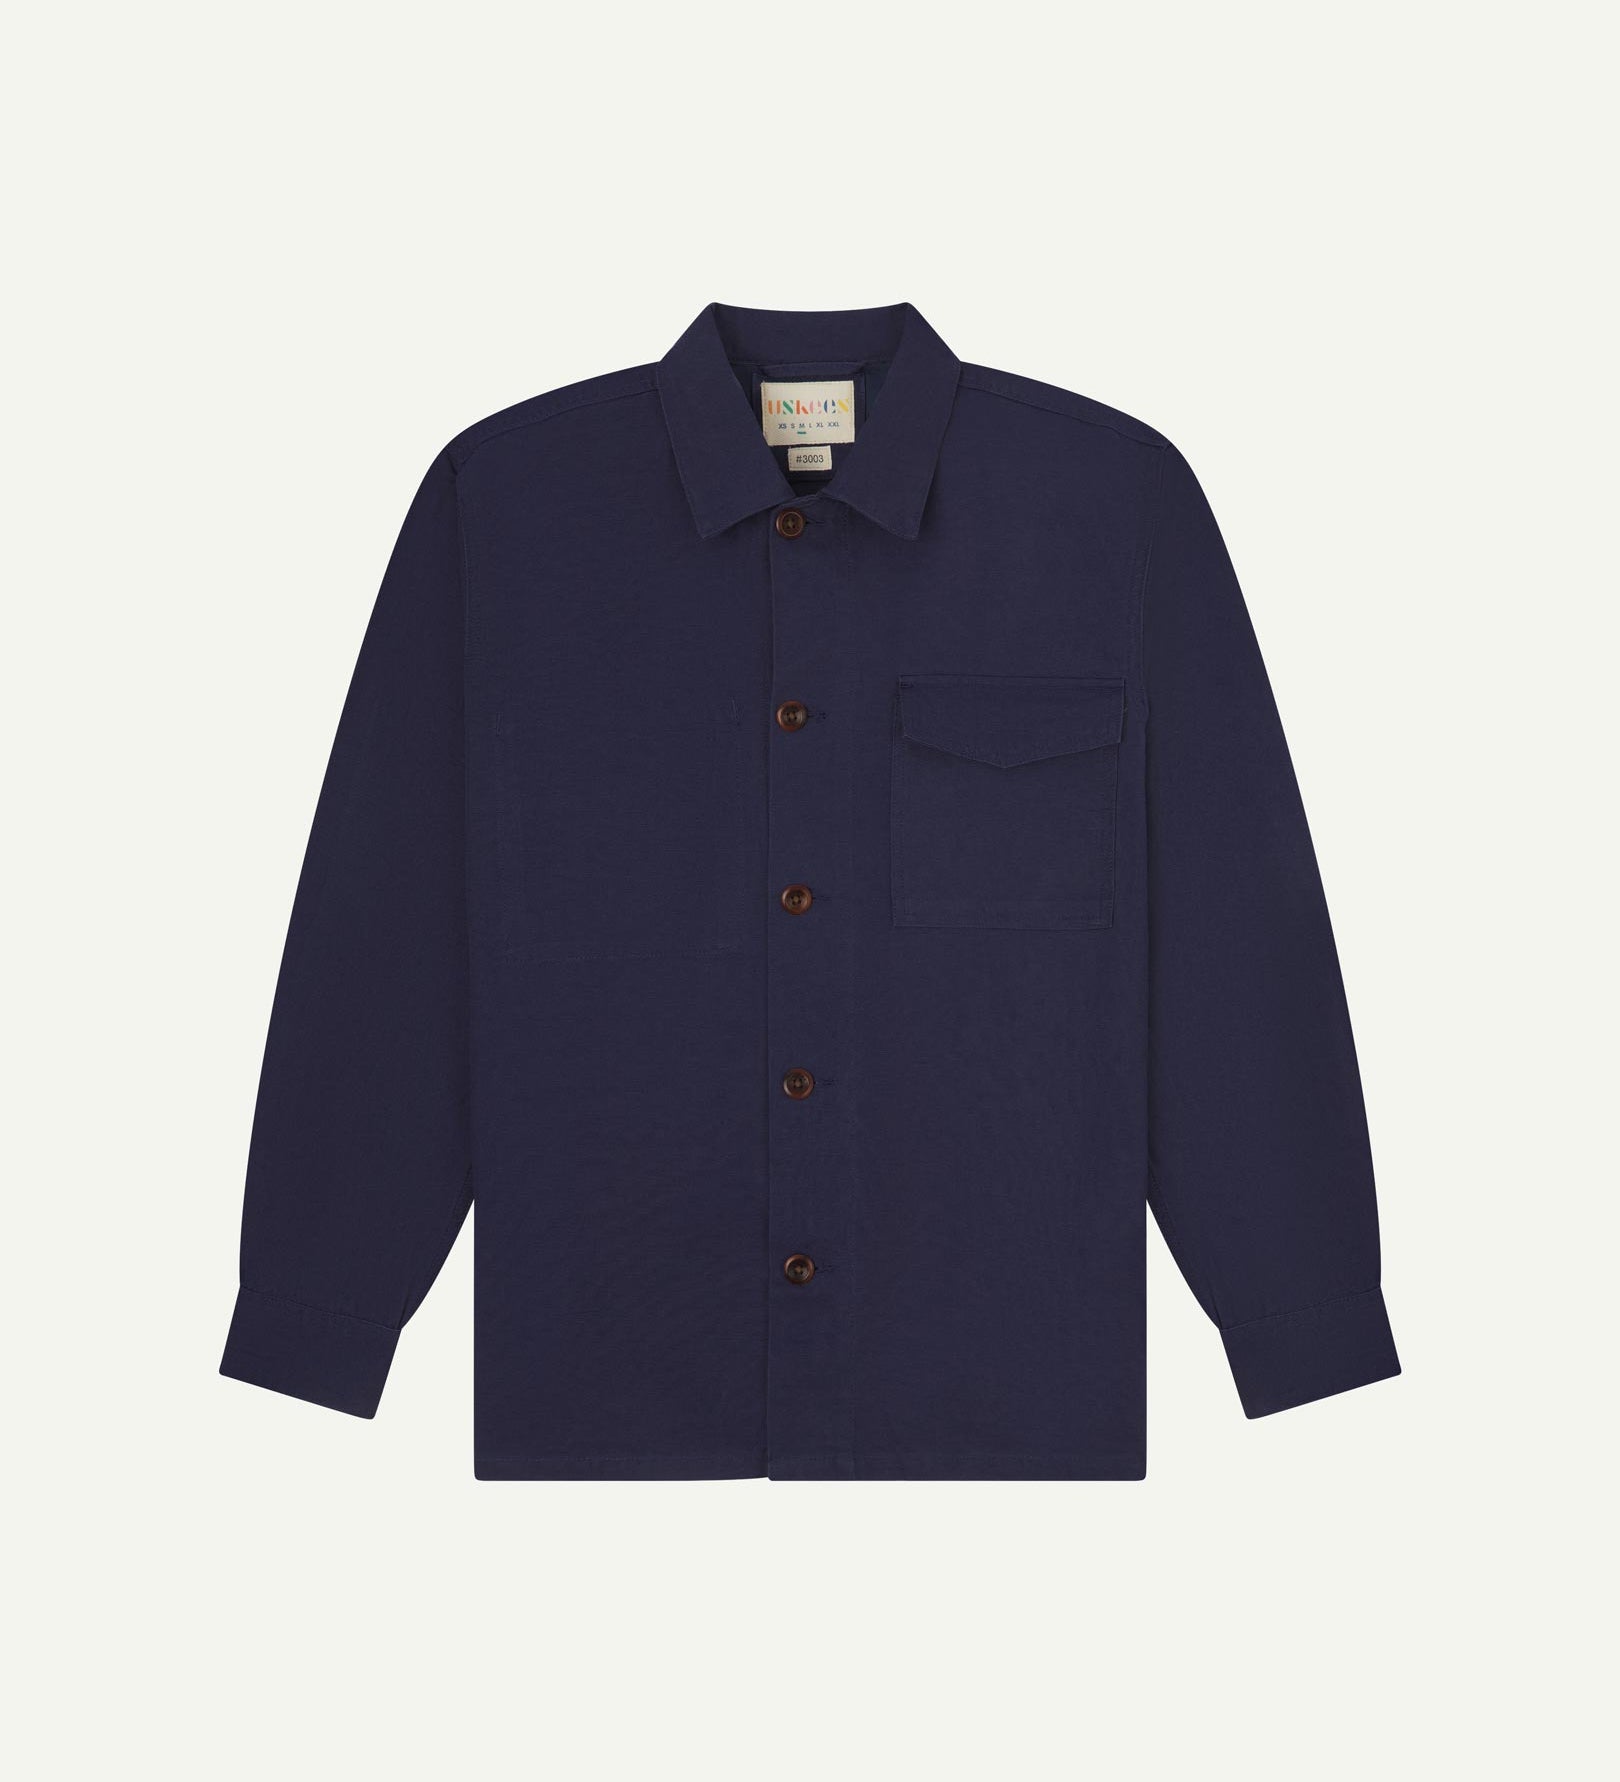 Midnight blue buttoned organic cotton workshirt from Uskees with clear view of chest pocket and Uskees branding label.